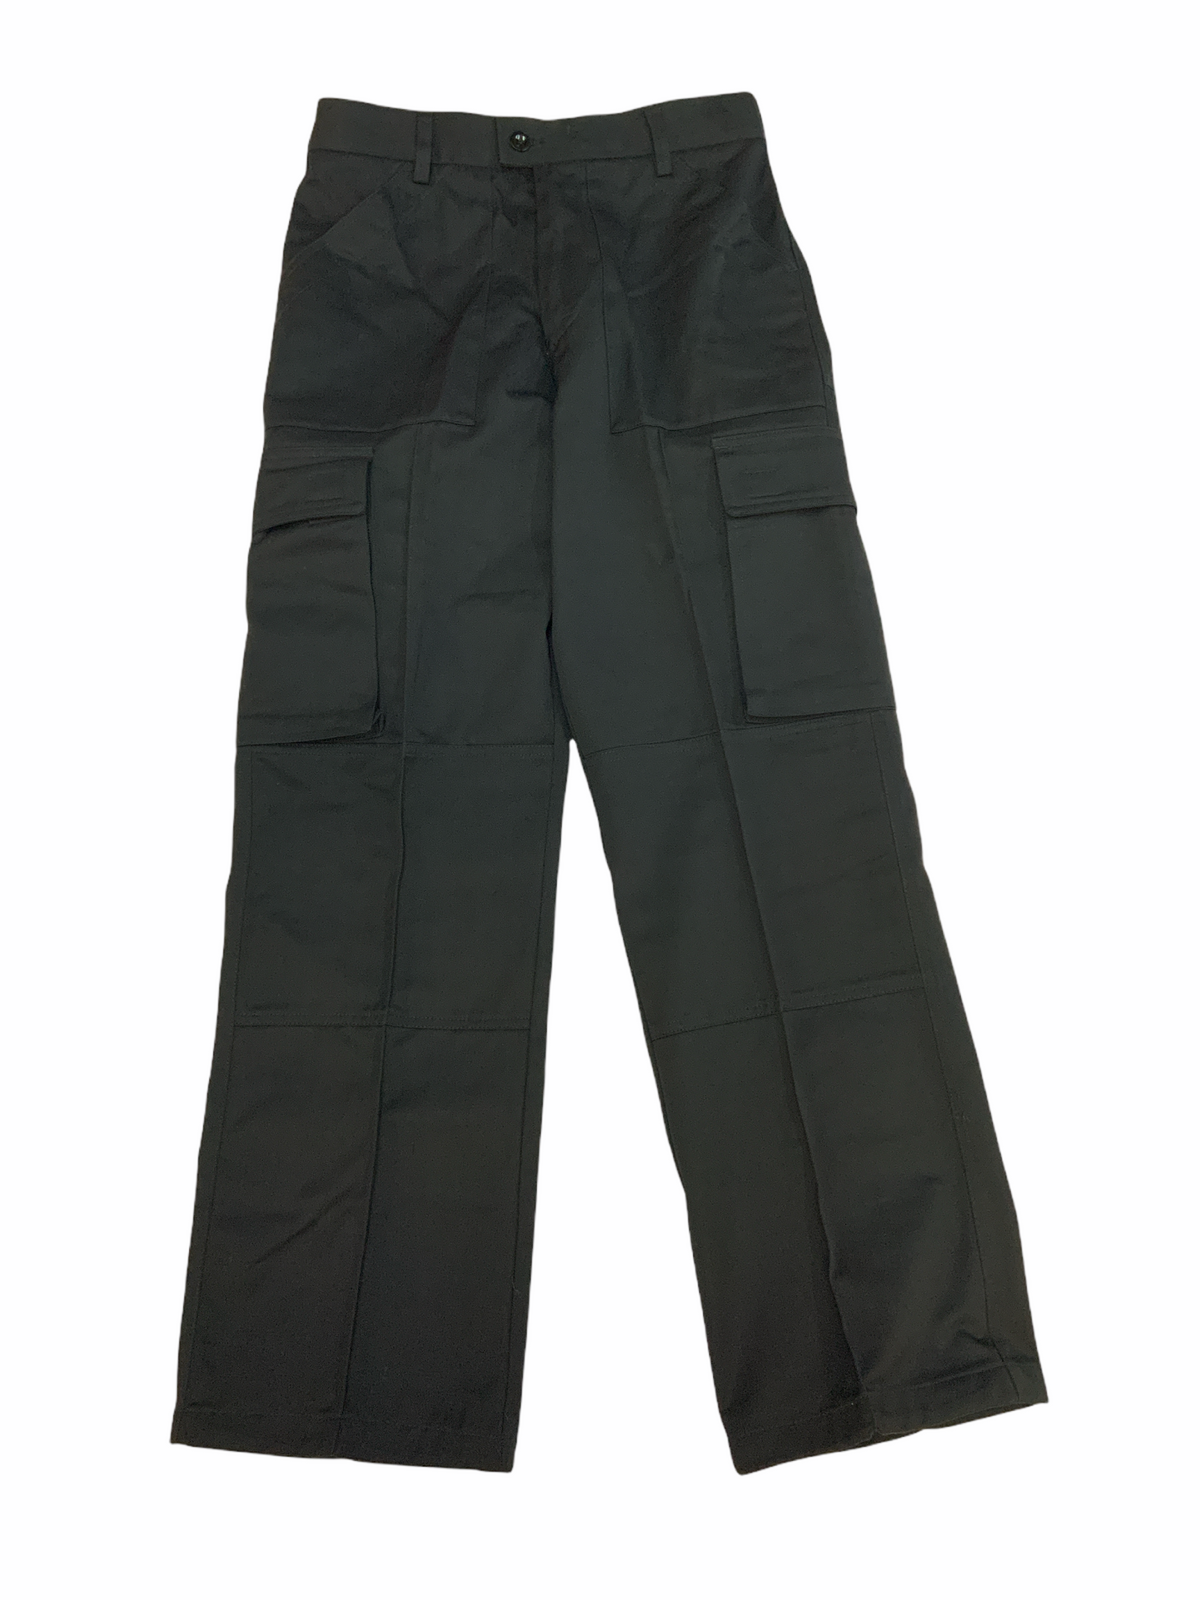 New Turner Virr Male Cargo Trousers Black Tactical Security Dog Handle ...